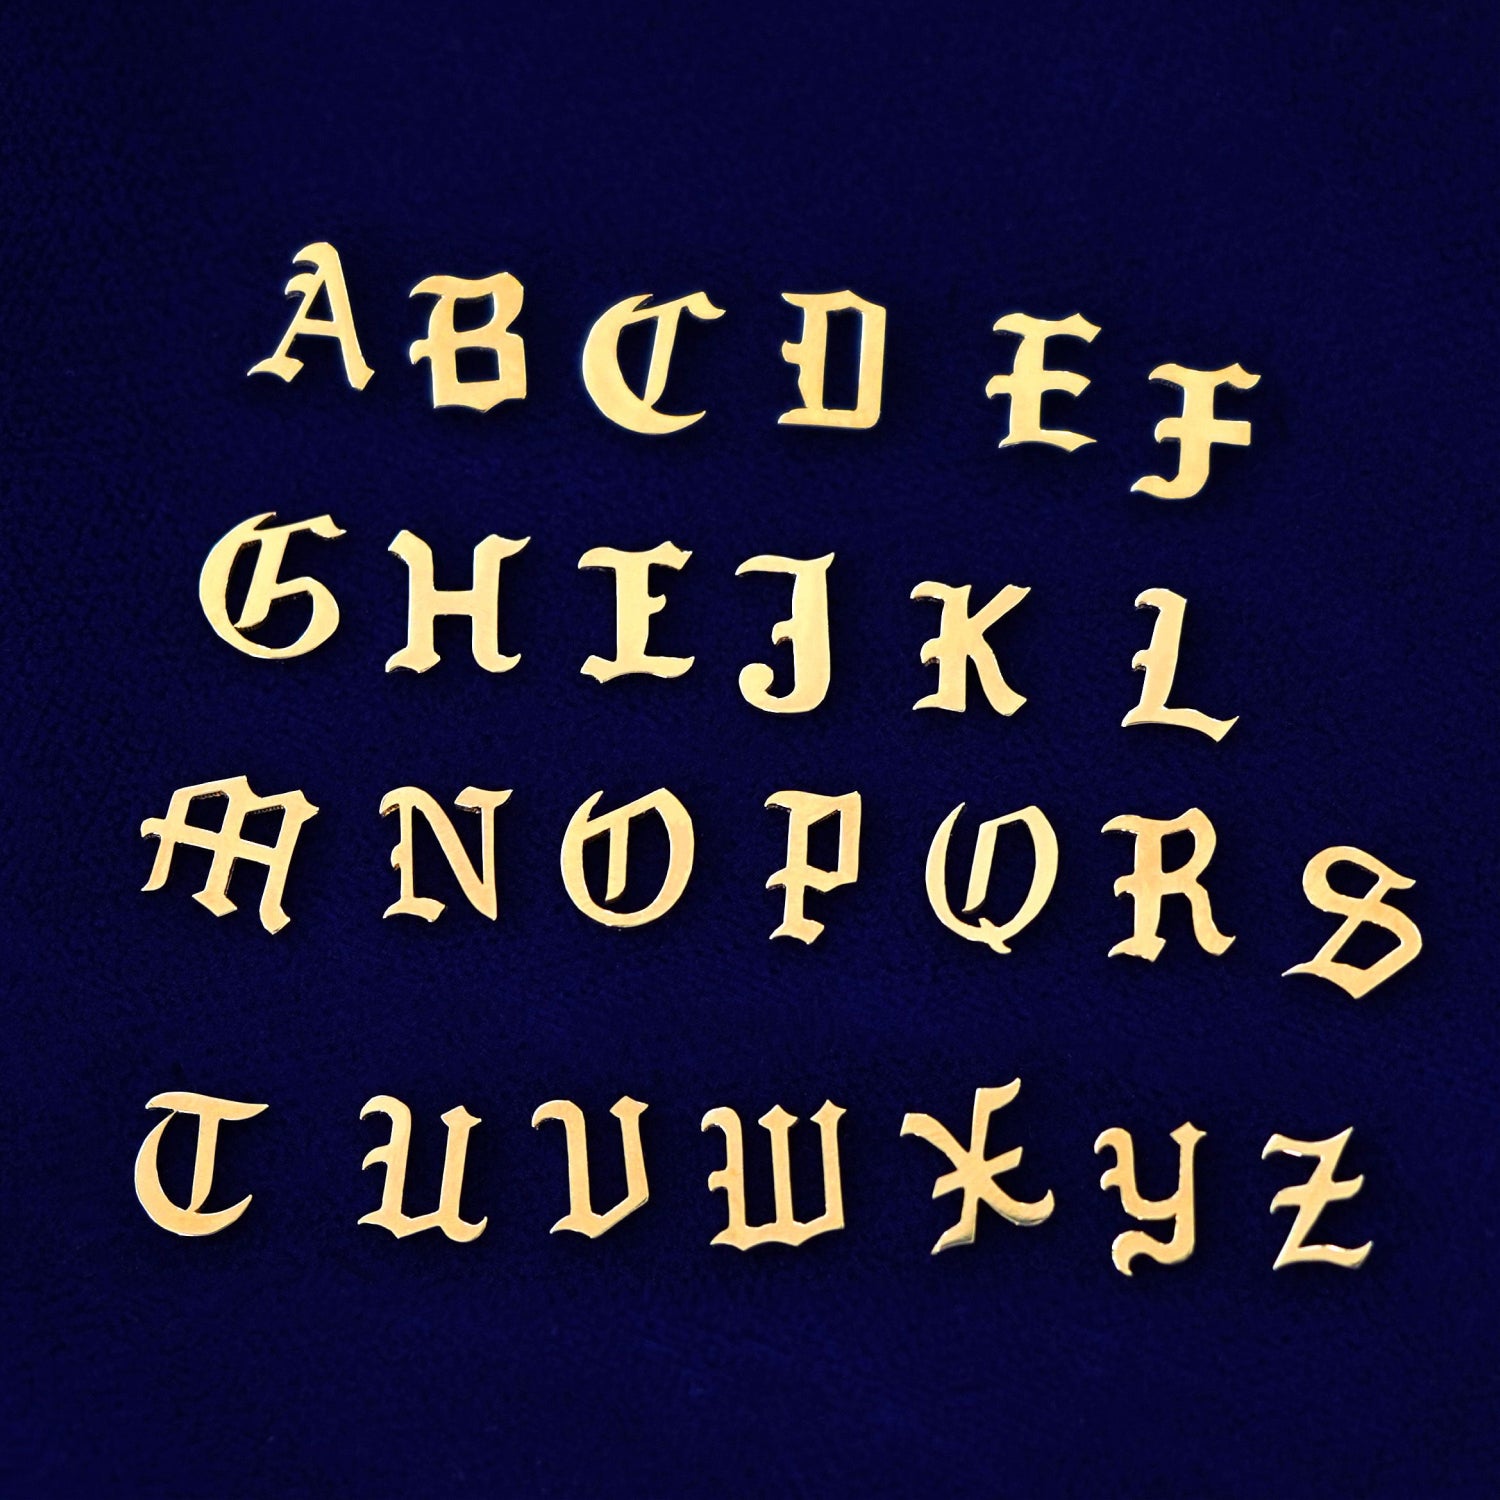 All 26 versions of the solid 14k yellow gold versions in the unique Automic Gold font lined up on a dark blue background